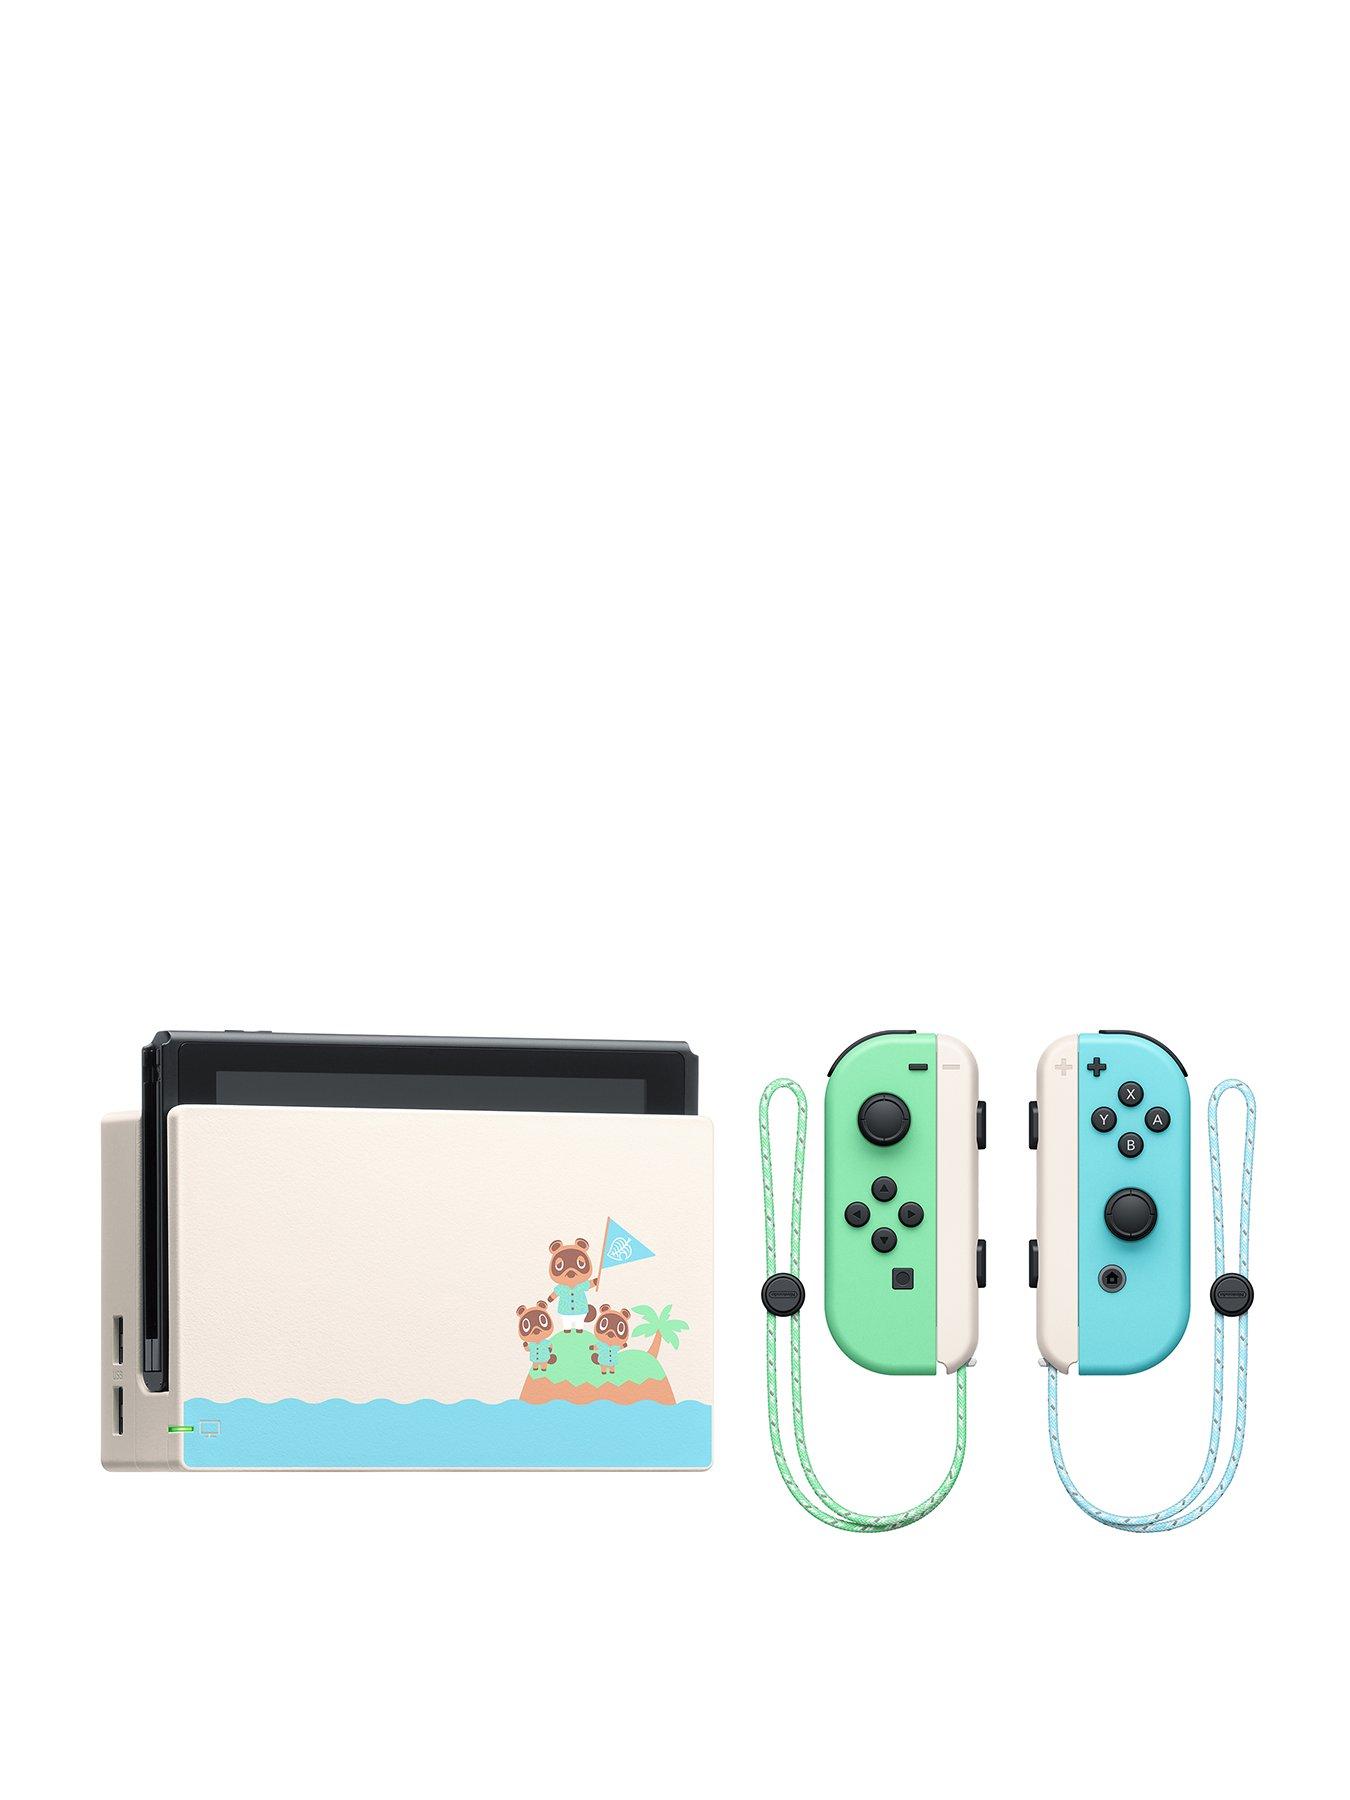 animal crossing switch system pre order